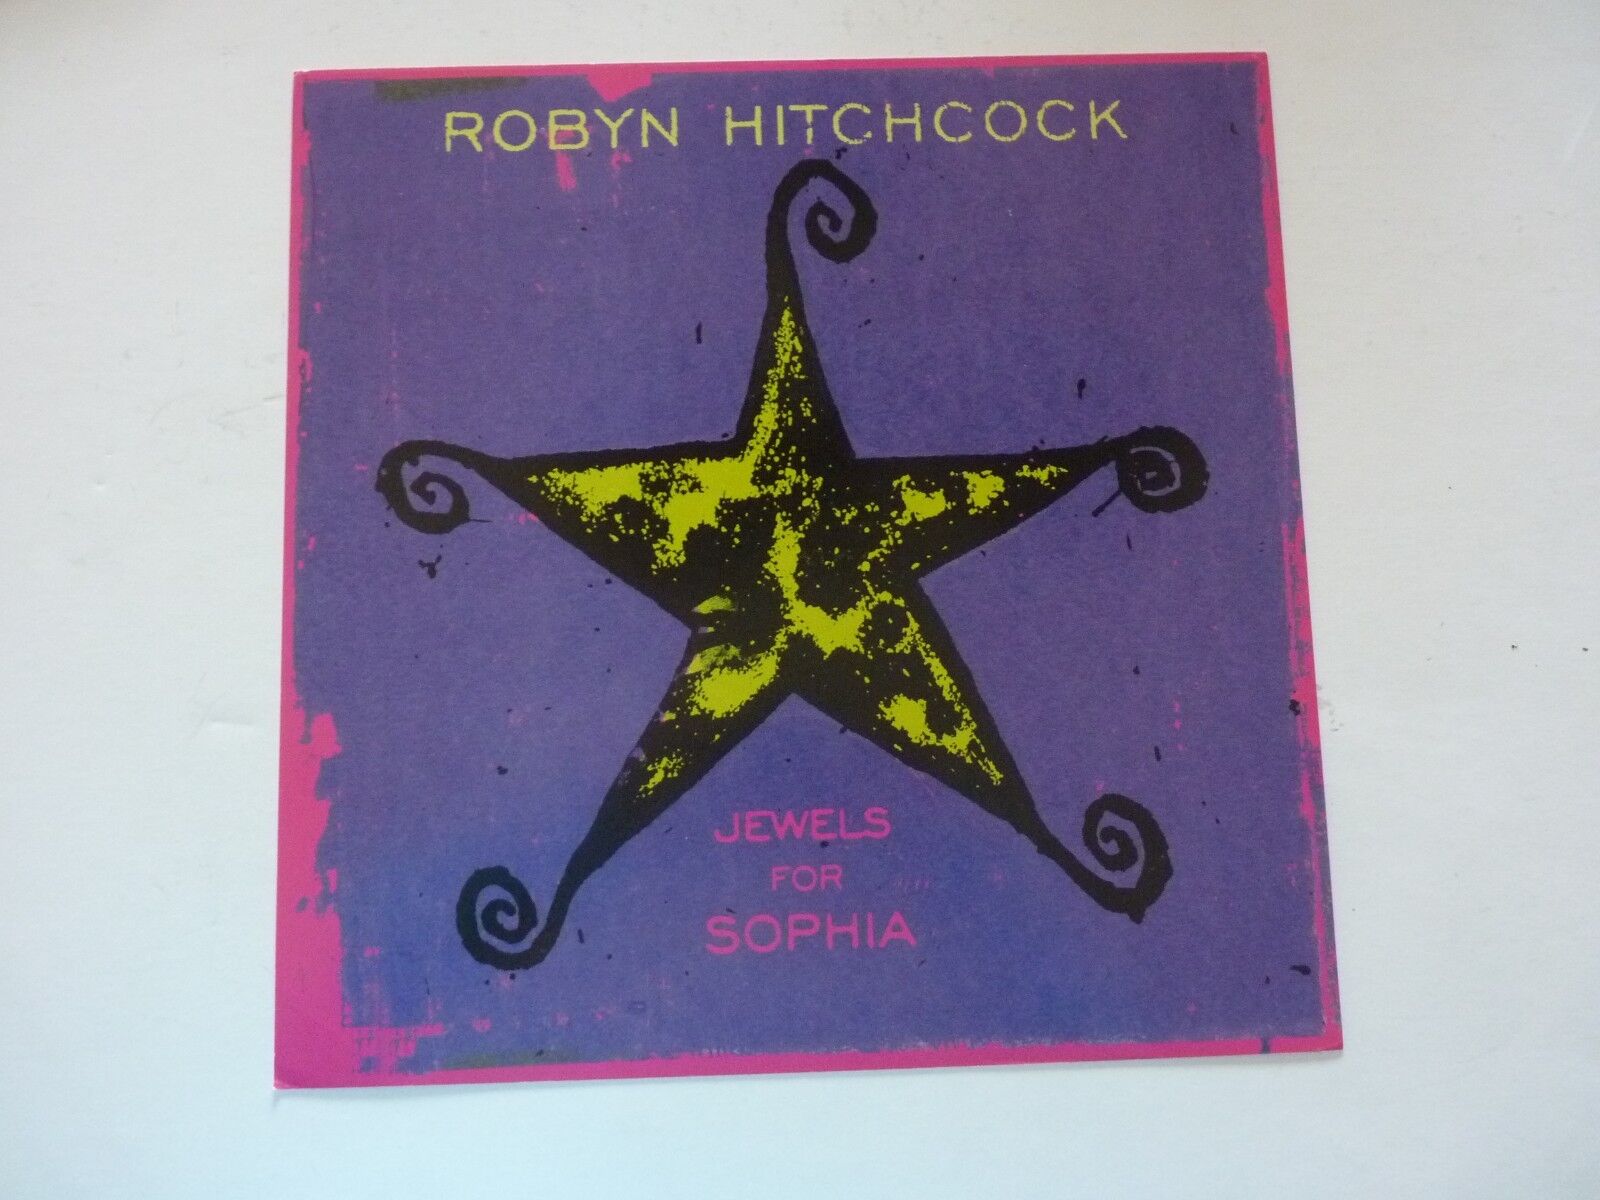 Robyn Hitchcock Jewels For Sophia LP Record Photo Poster painting Flat 12x12 Poster